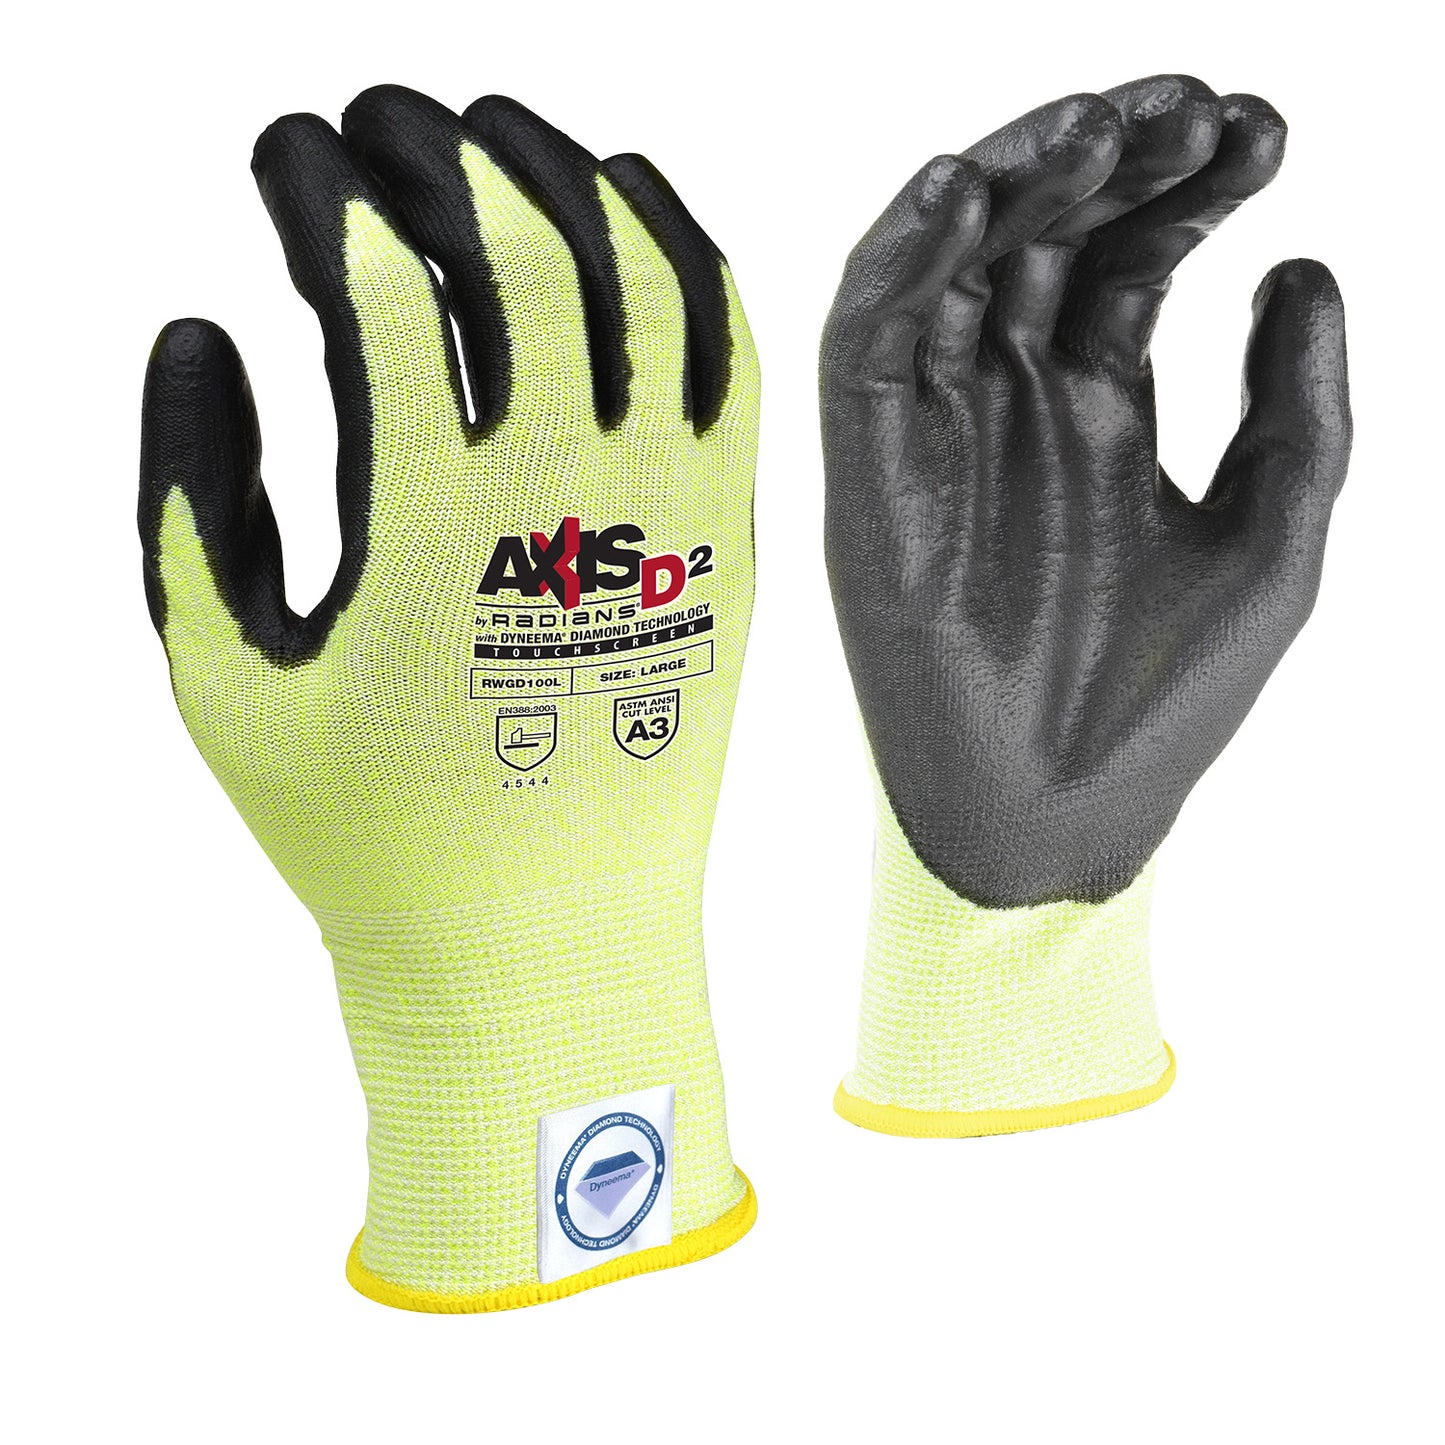 Radians RWGD100 AXIS D2 Dyneema® Cut Protection Level A3 Touchscreen Glove